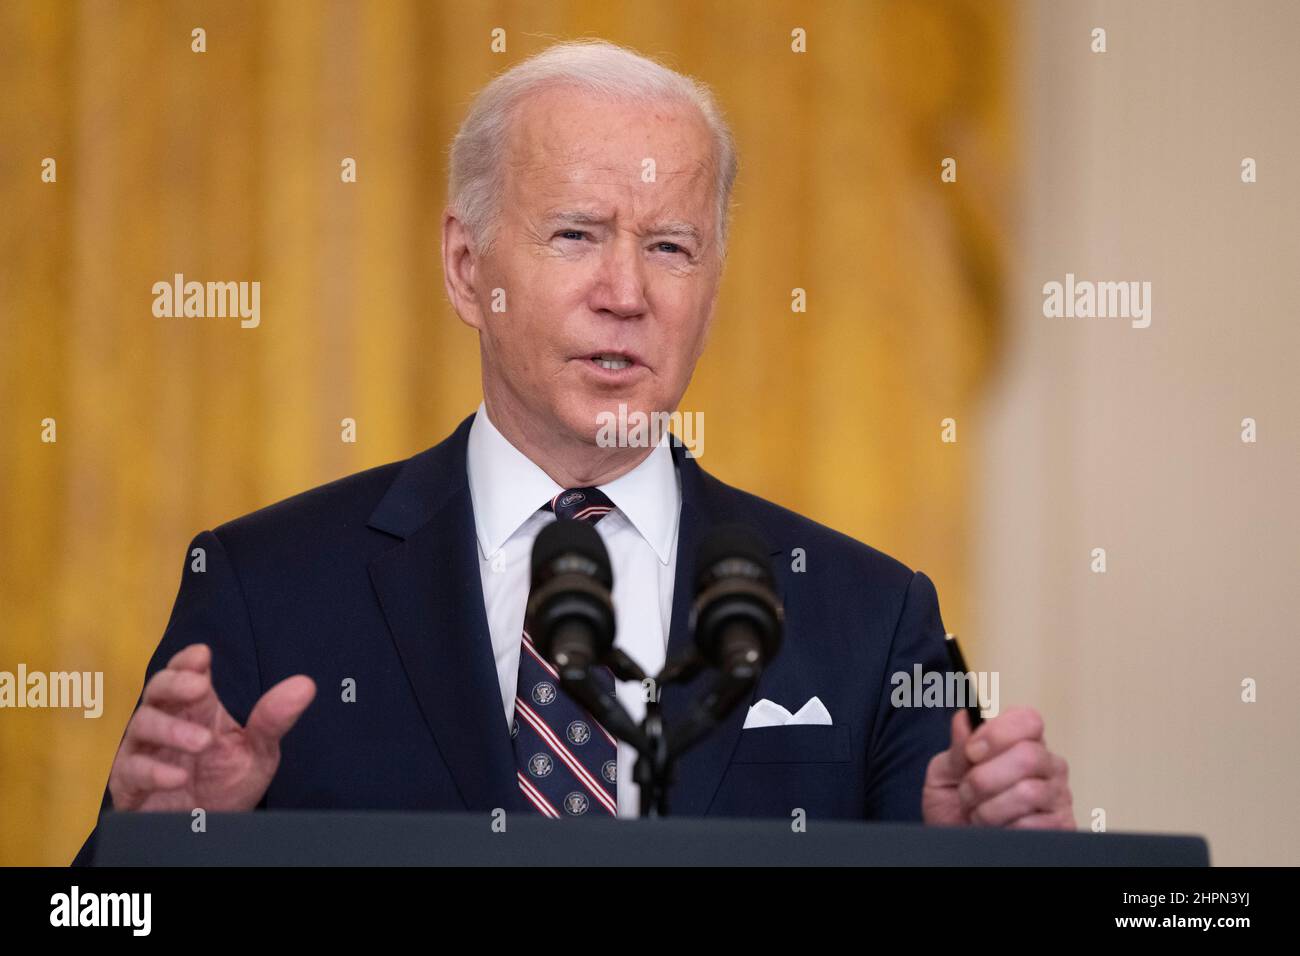 United States President Joe Biden provides an update to the American people on the situation in Russia and Ukraine from the East Room of the White House in Washington, DC on Tuesday, February 22, 2022.Credit: Chris Kleponis/Pool via CNP /MediaPunch Stock Photo